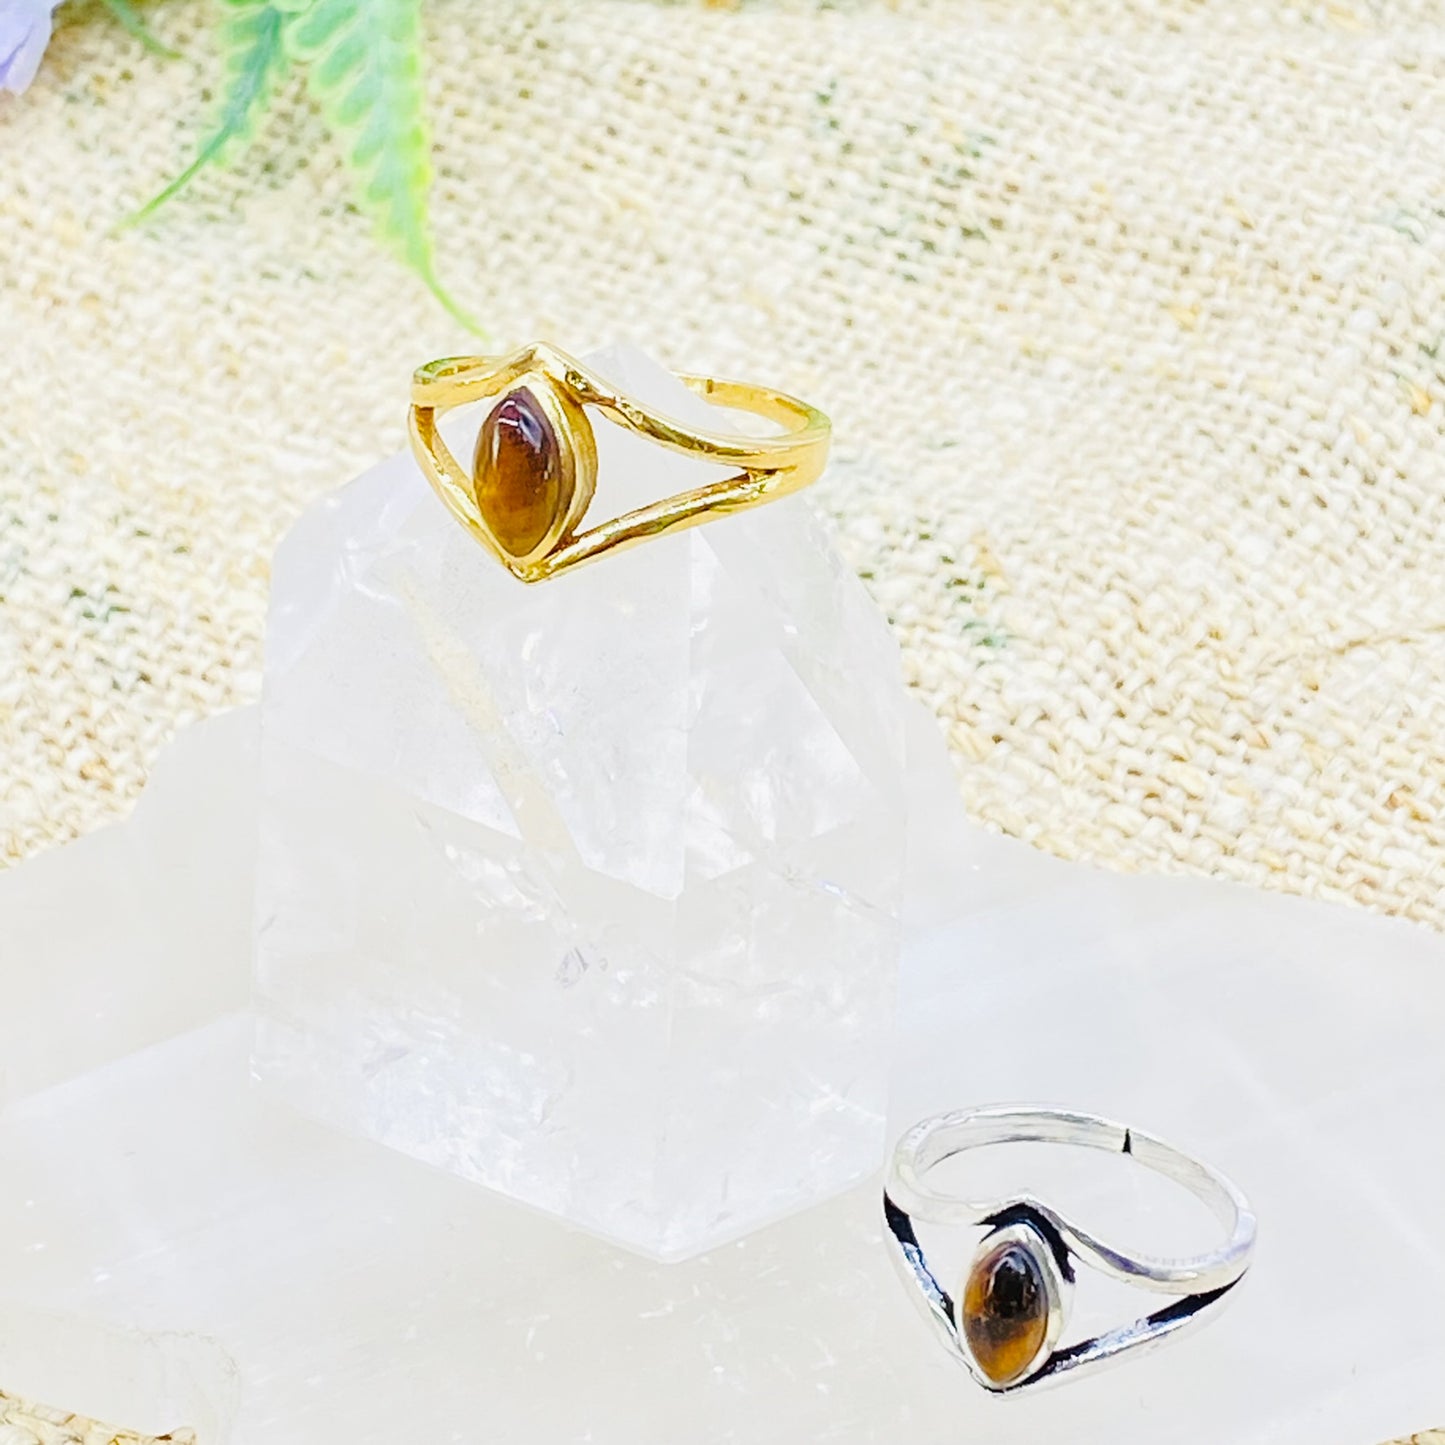 Sterling Silver Ring, Gold Filled Rings, Non Tarnish Rings, Crystal Rings, Bohemian Jewelry, Ethnic Jewelry, Unique Rings, Healing Crystal